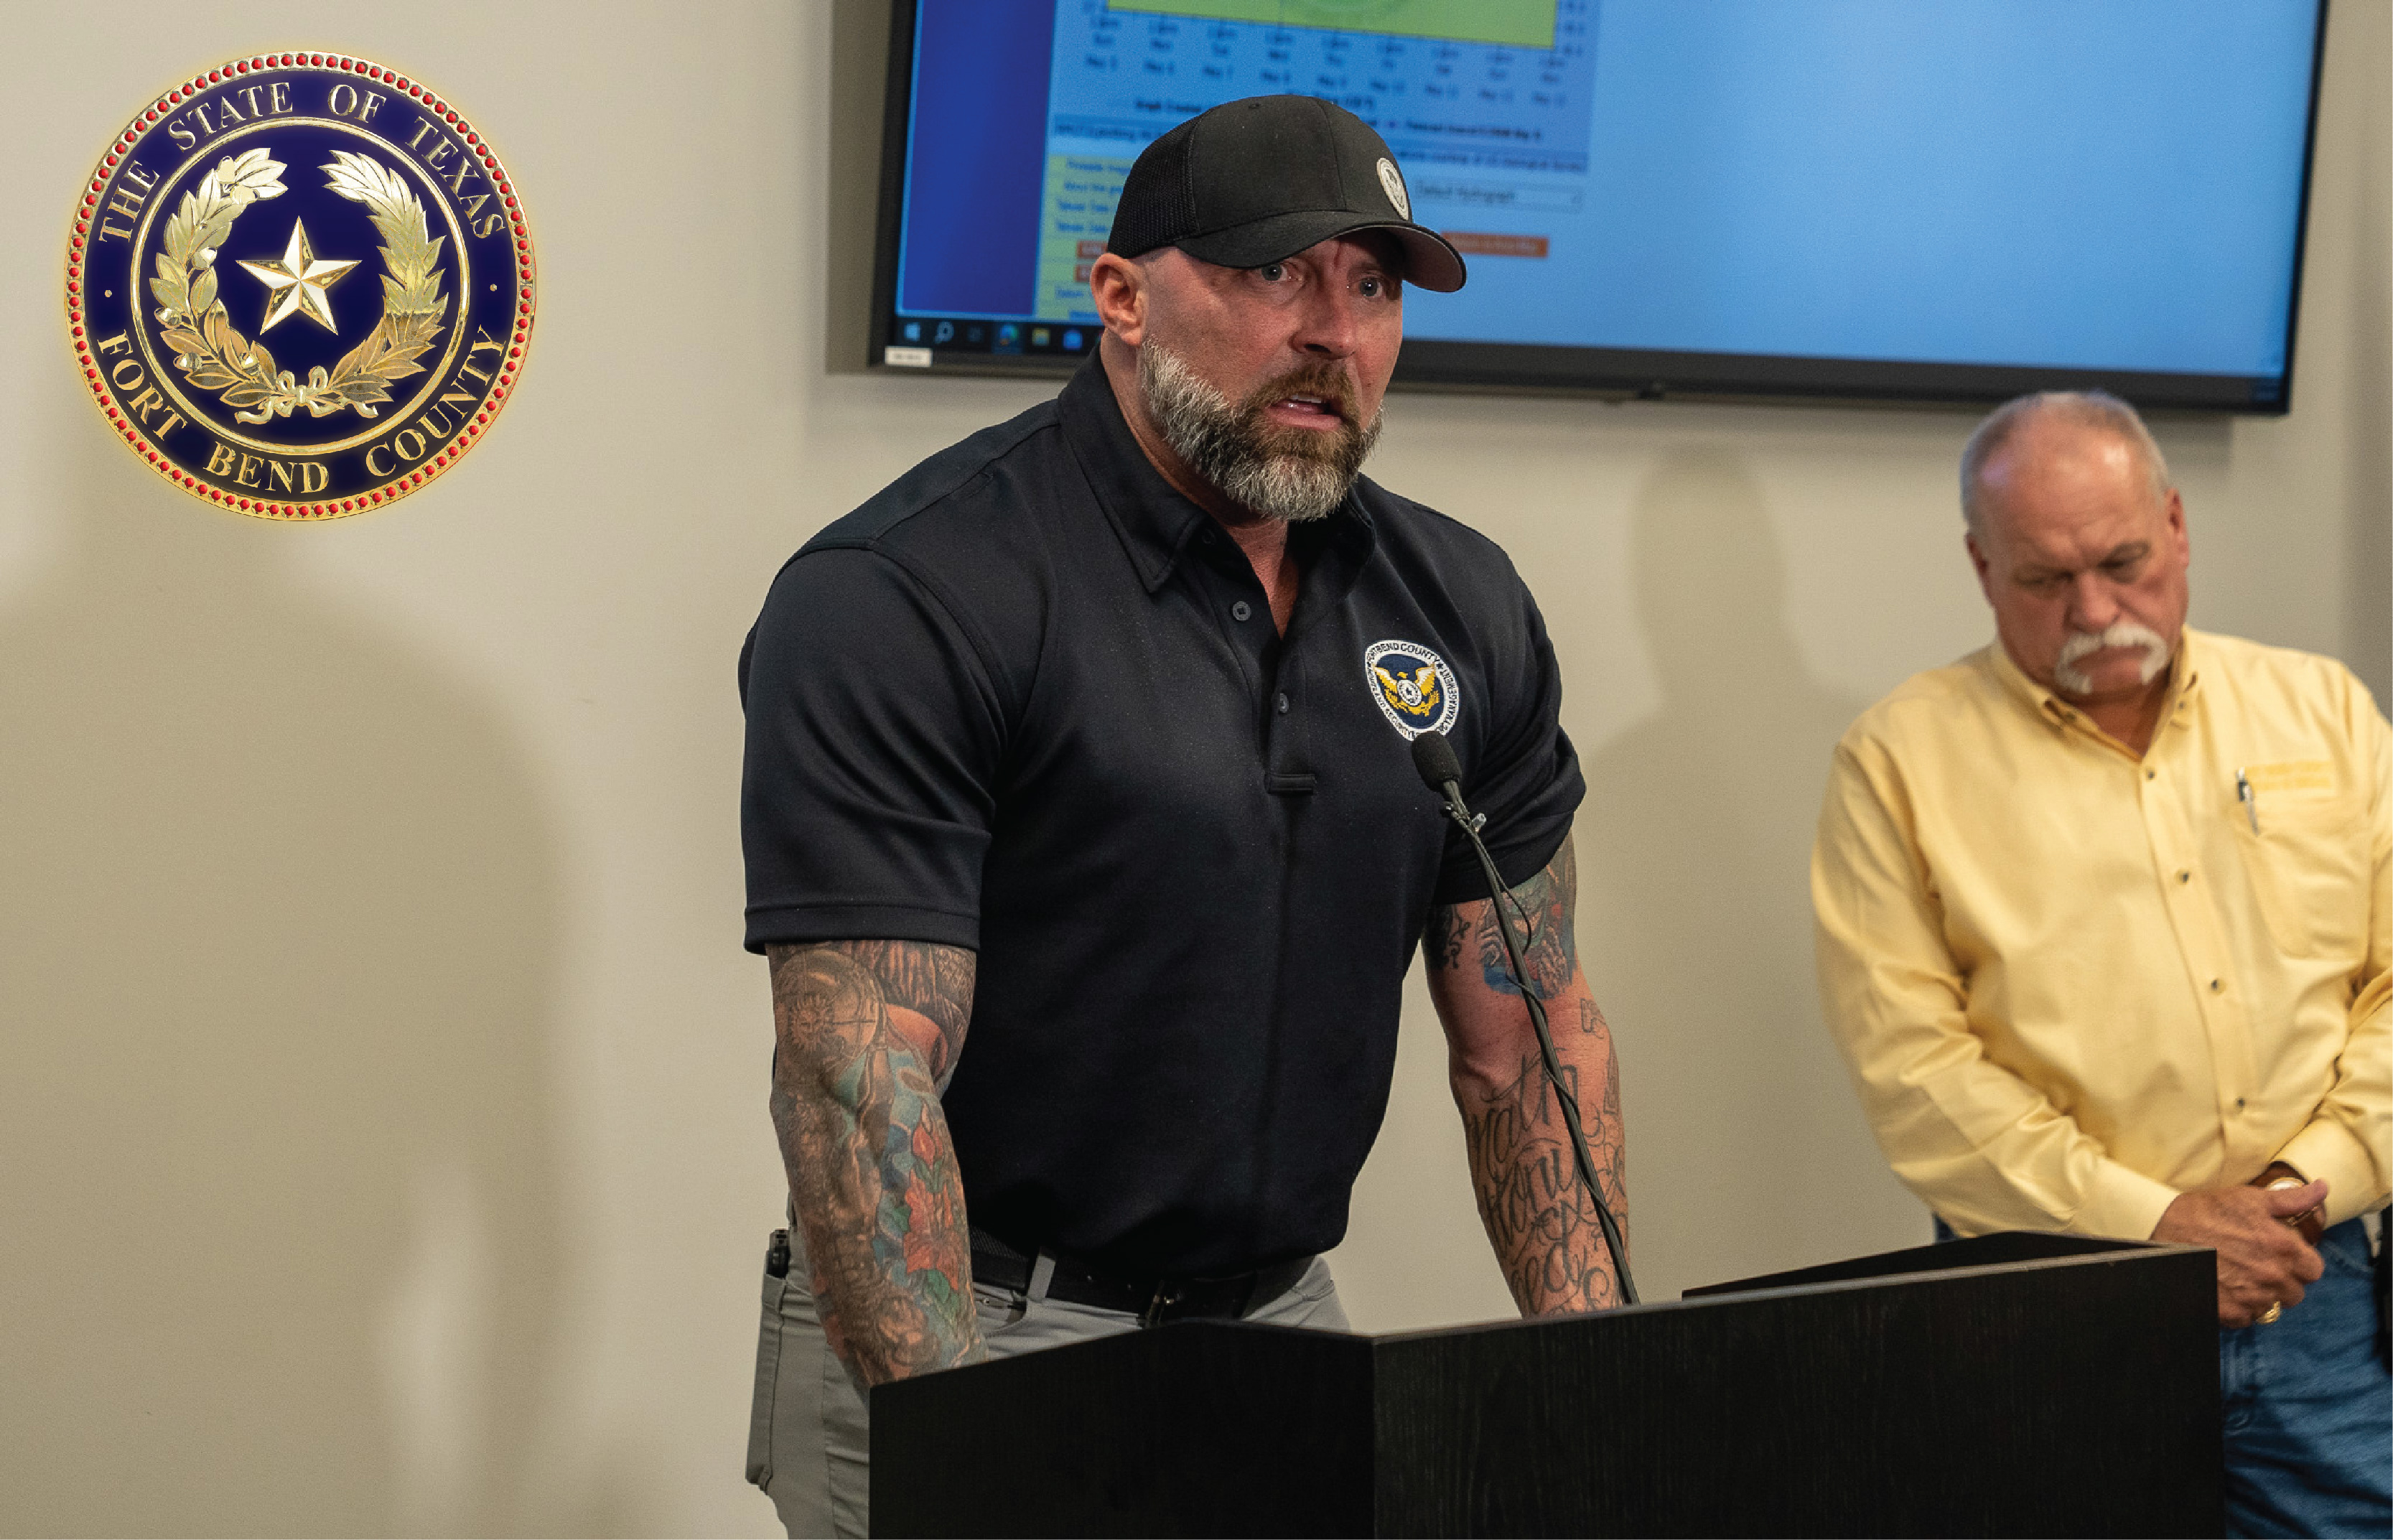 Fort Bend County Officials Provide Update on Potential Flooding